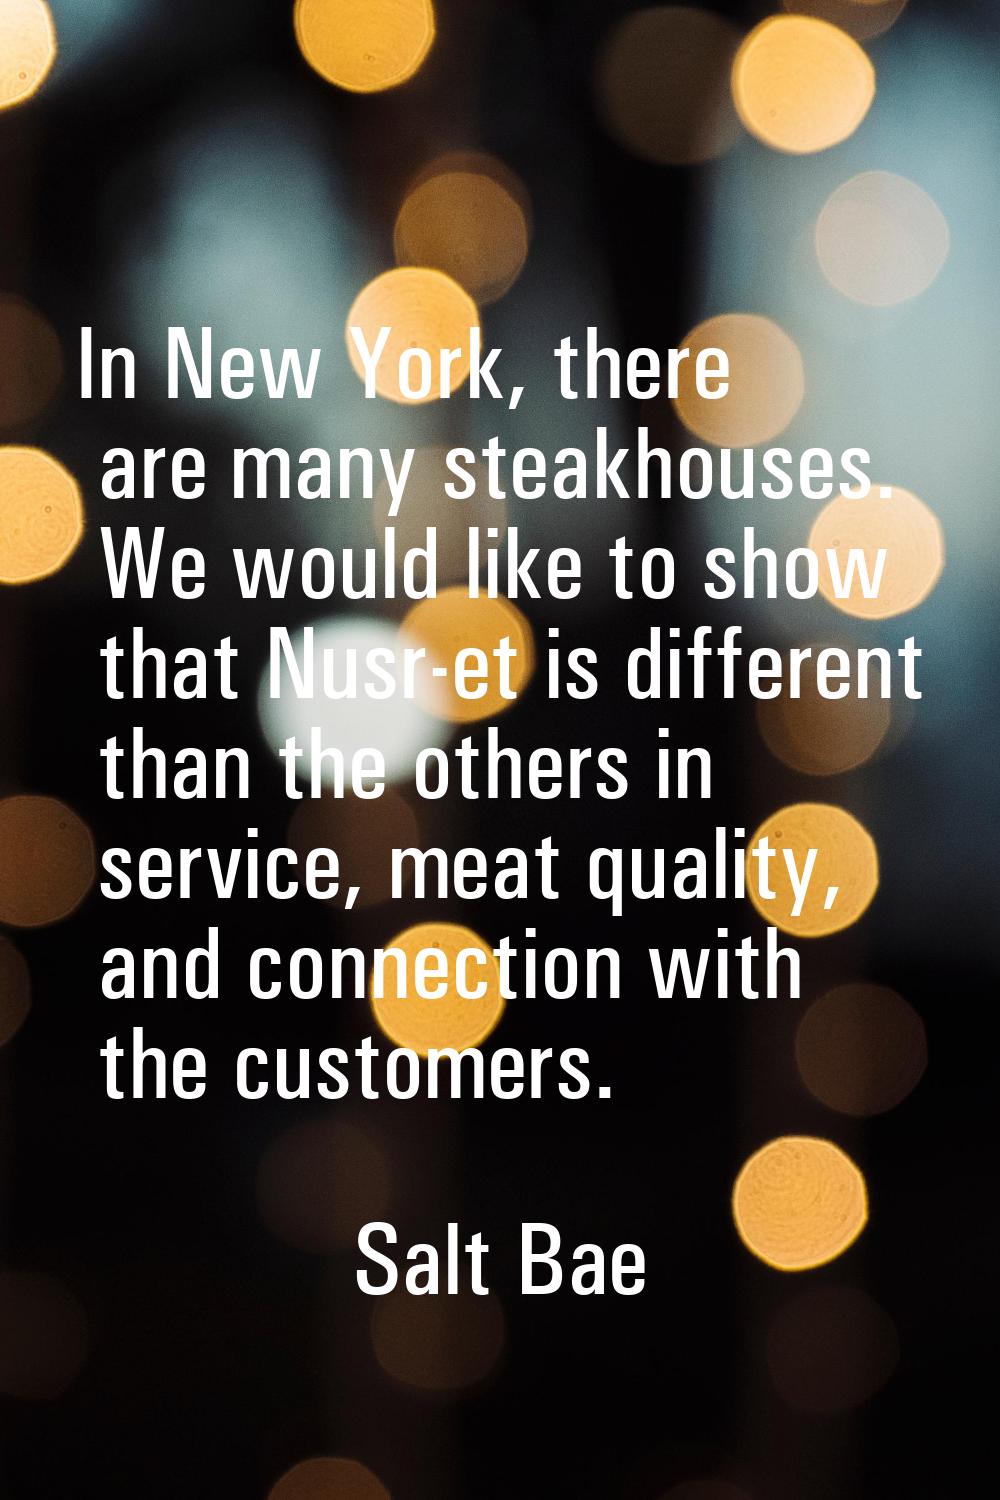 In New York, there are many steakhouses. We would like to show that Nusr-et is different than the o